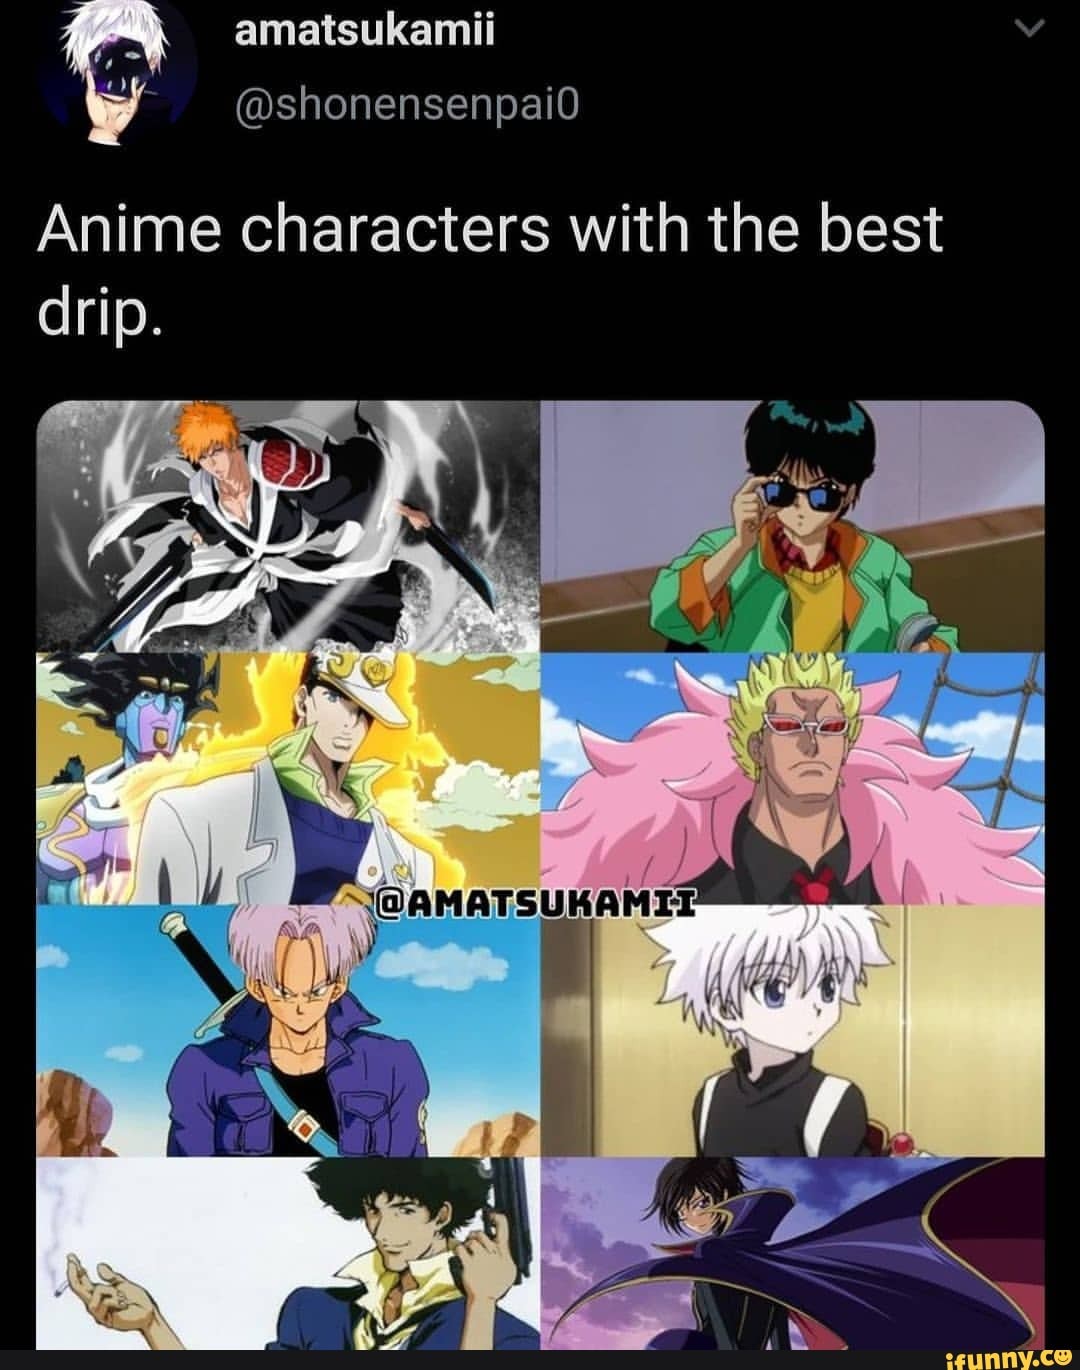 21 Anime Characters With The Most Drip From Head To Toe